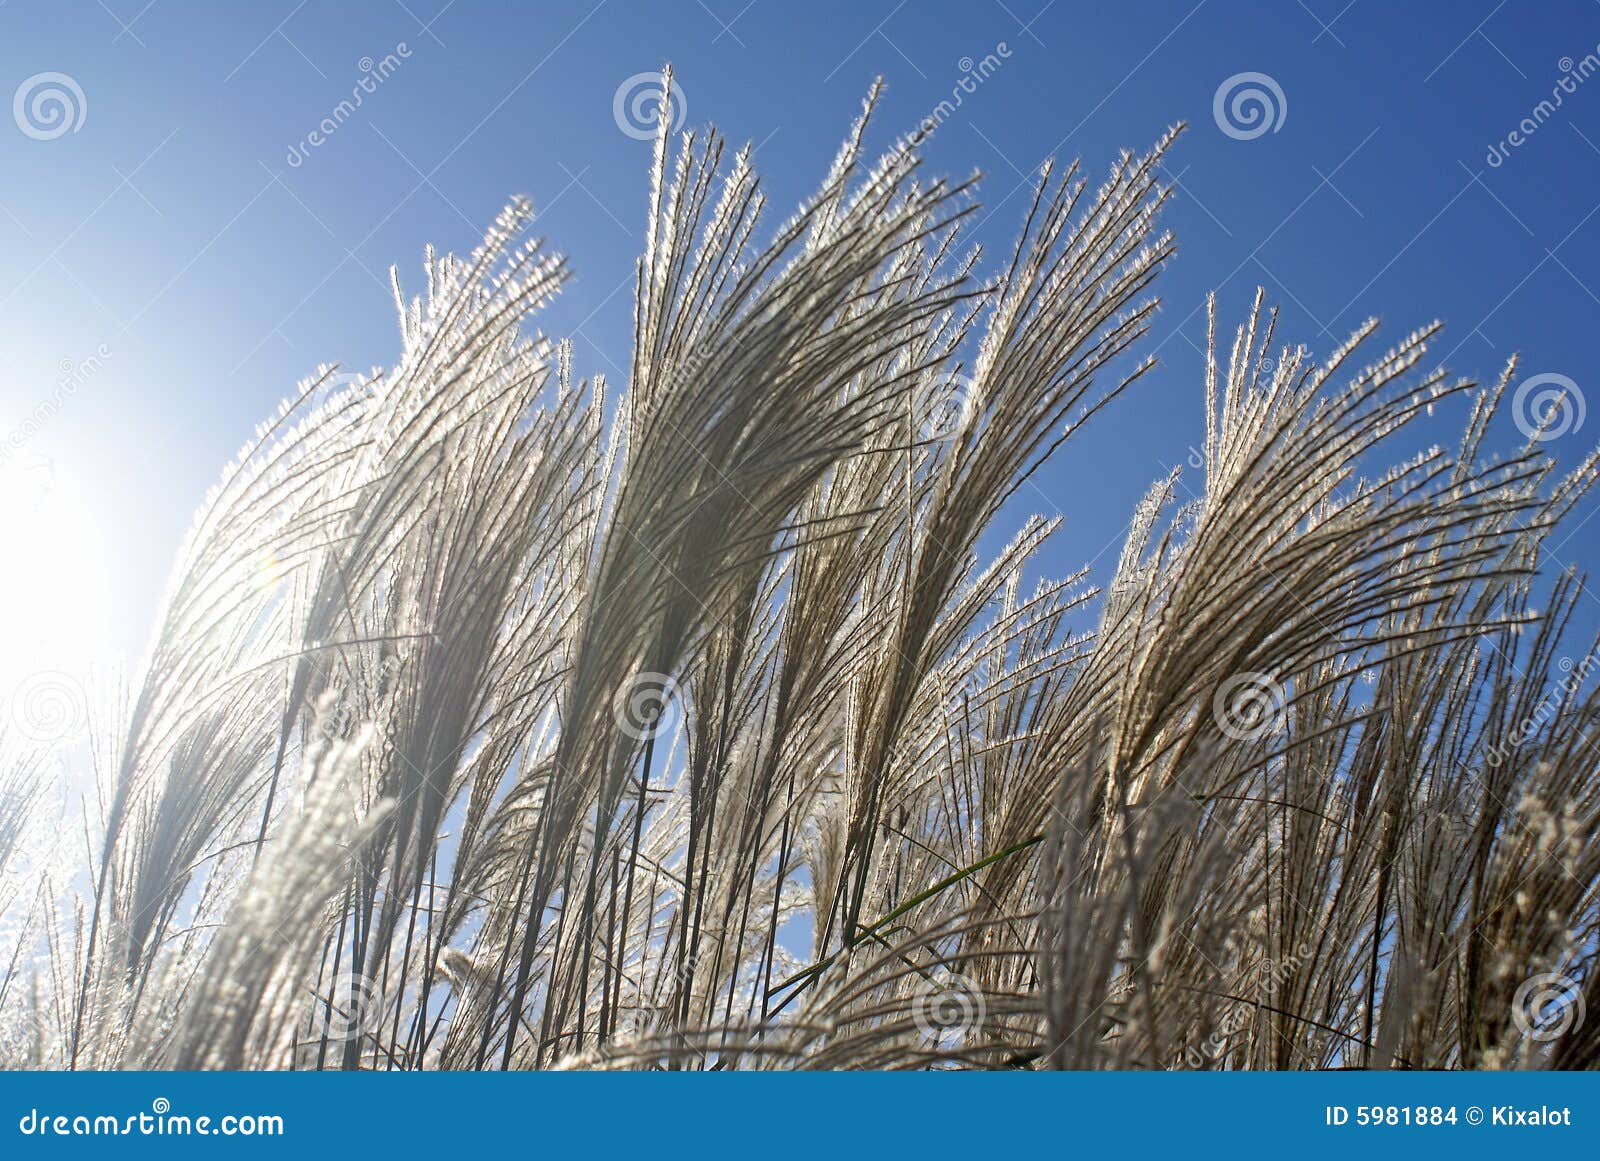 waving summer grasses in the sun